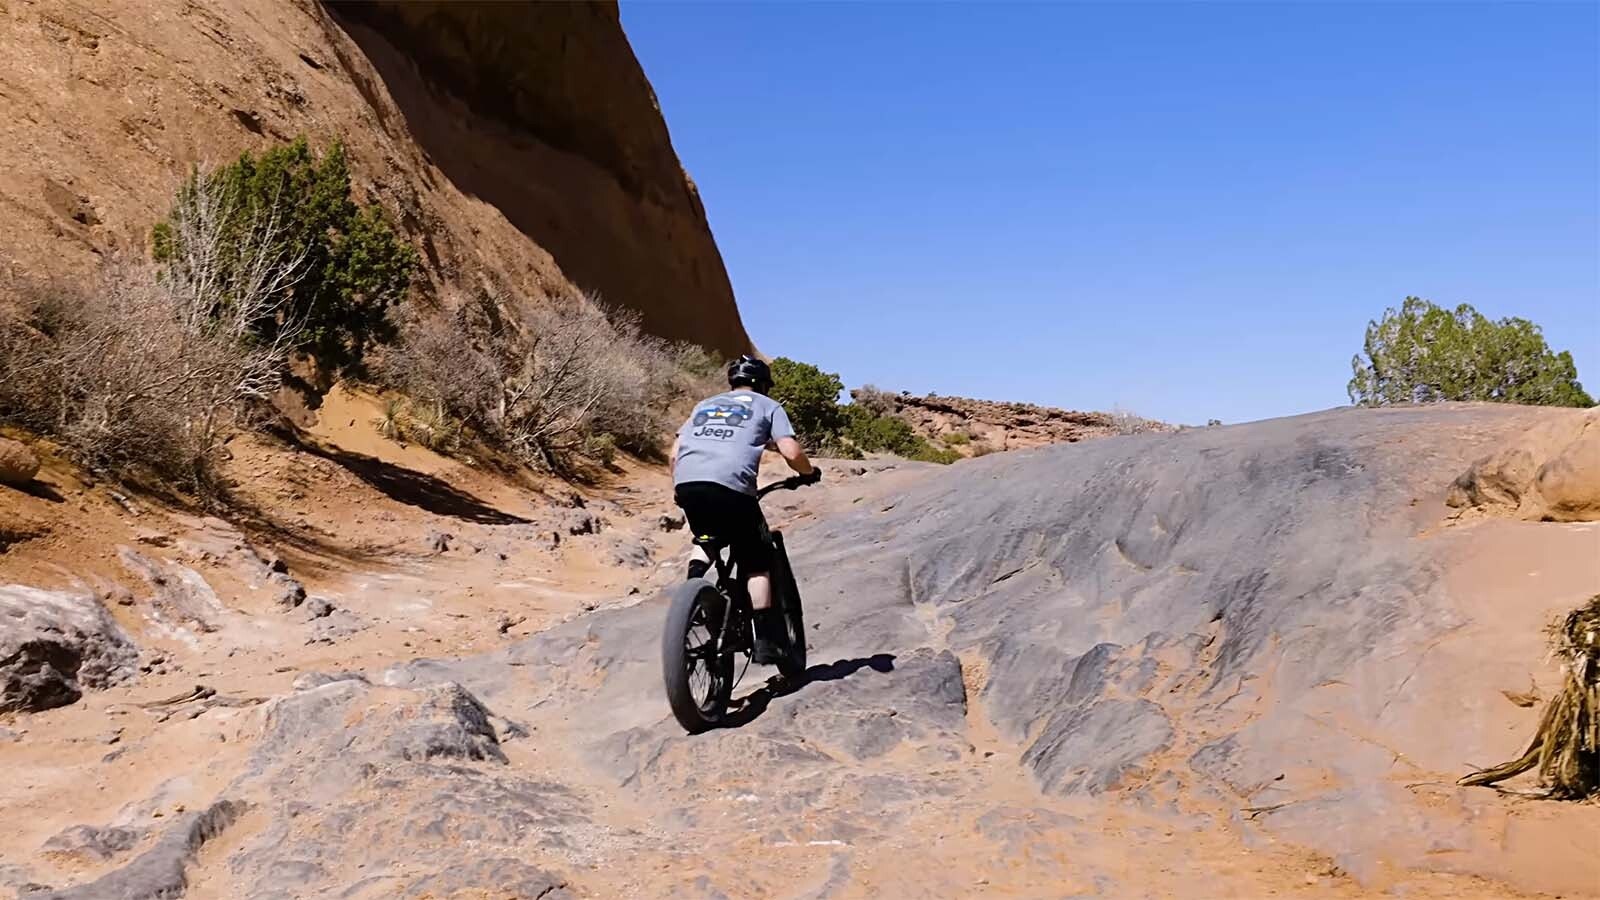 E-bike riding is becoming more popular on the rugged trails that snake through Moab, Utah.